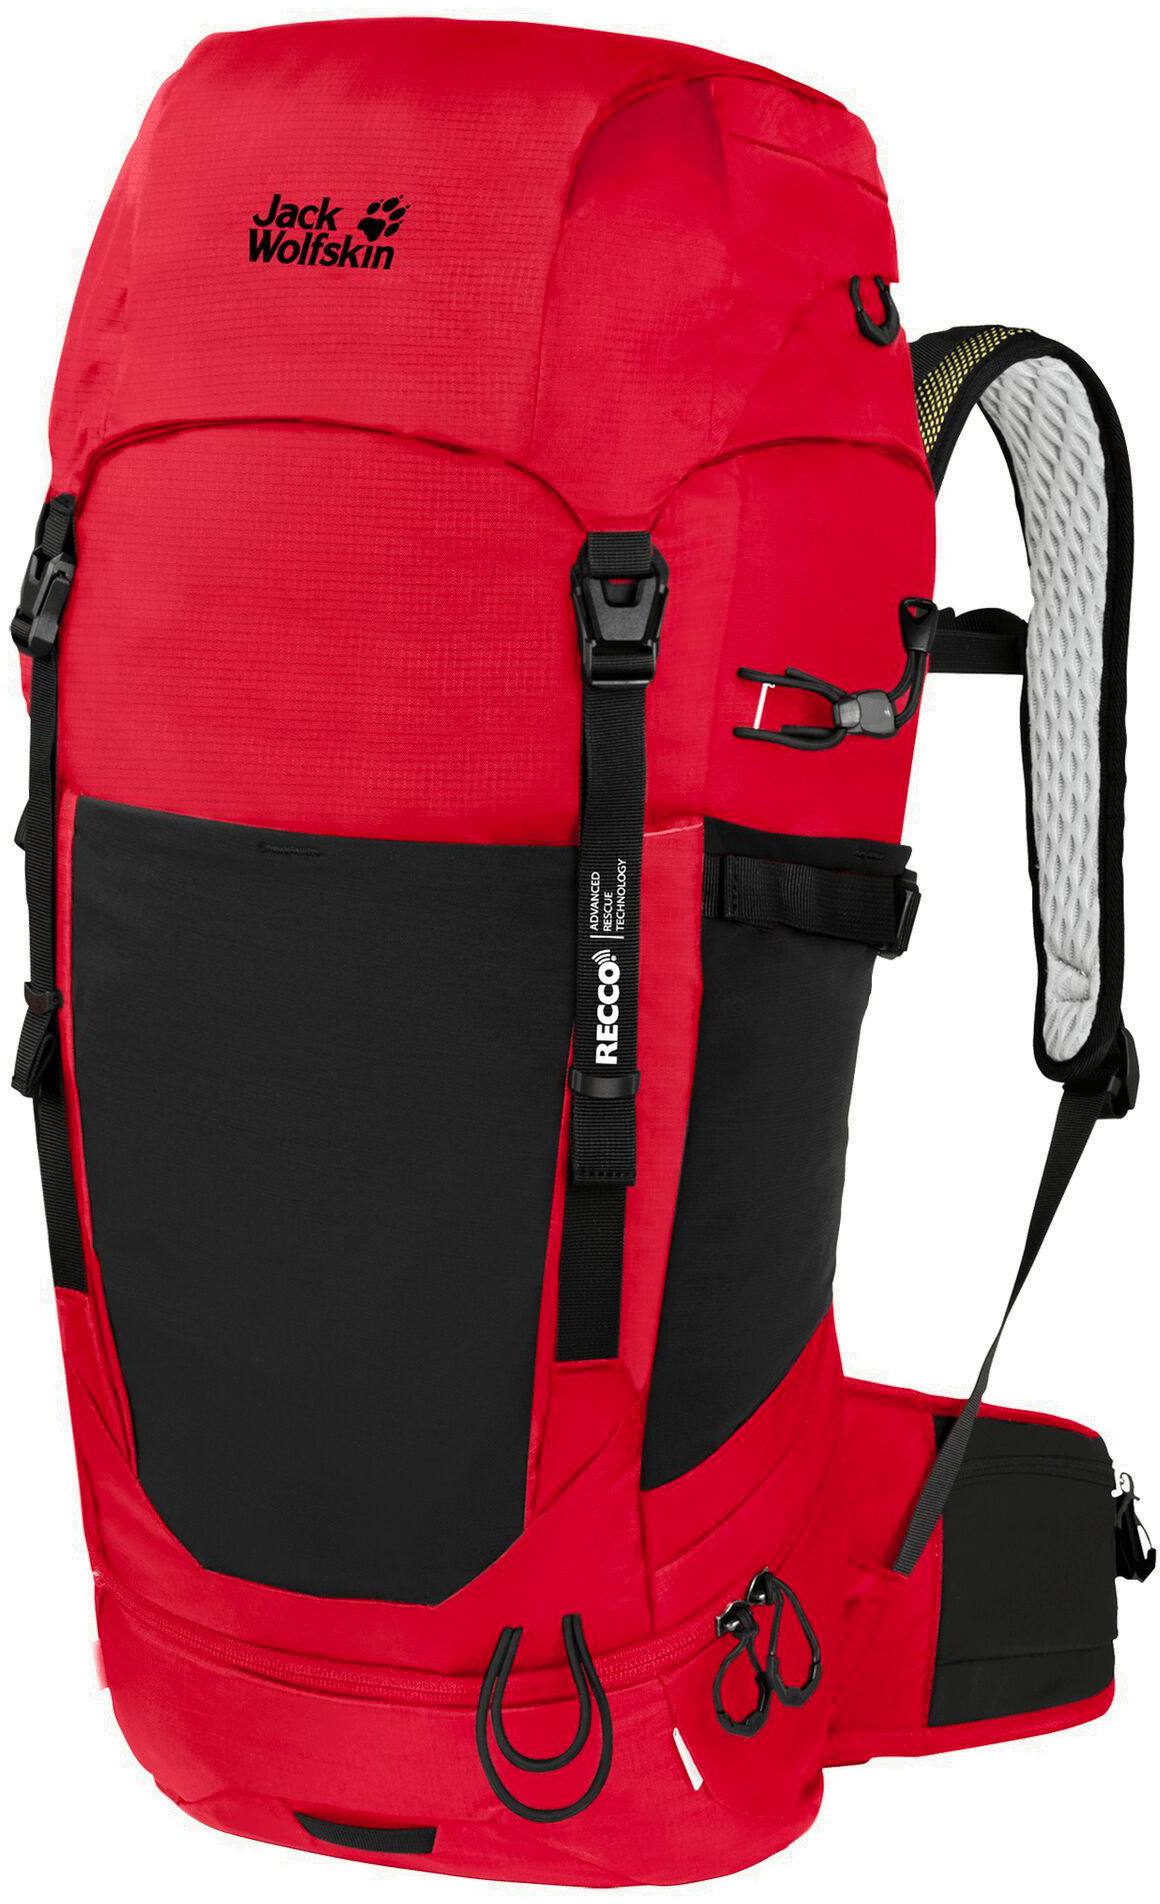 Wolftrail 34 Recco Red